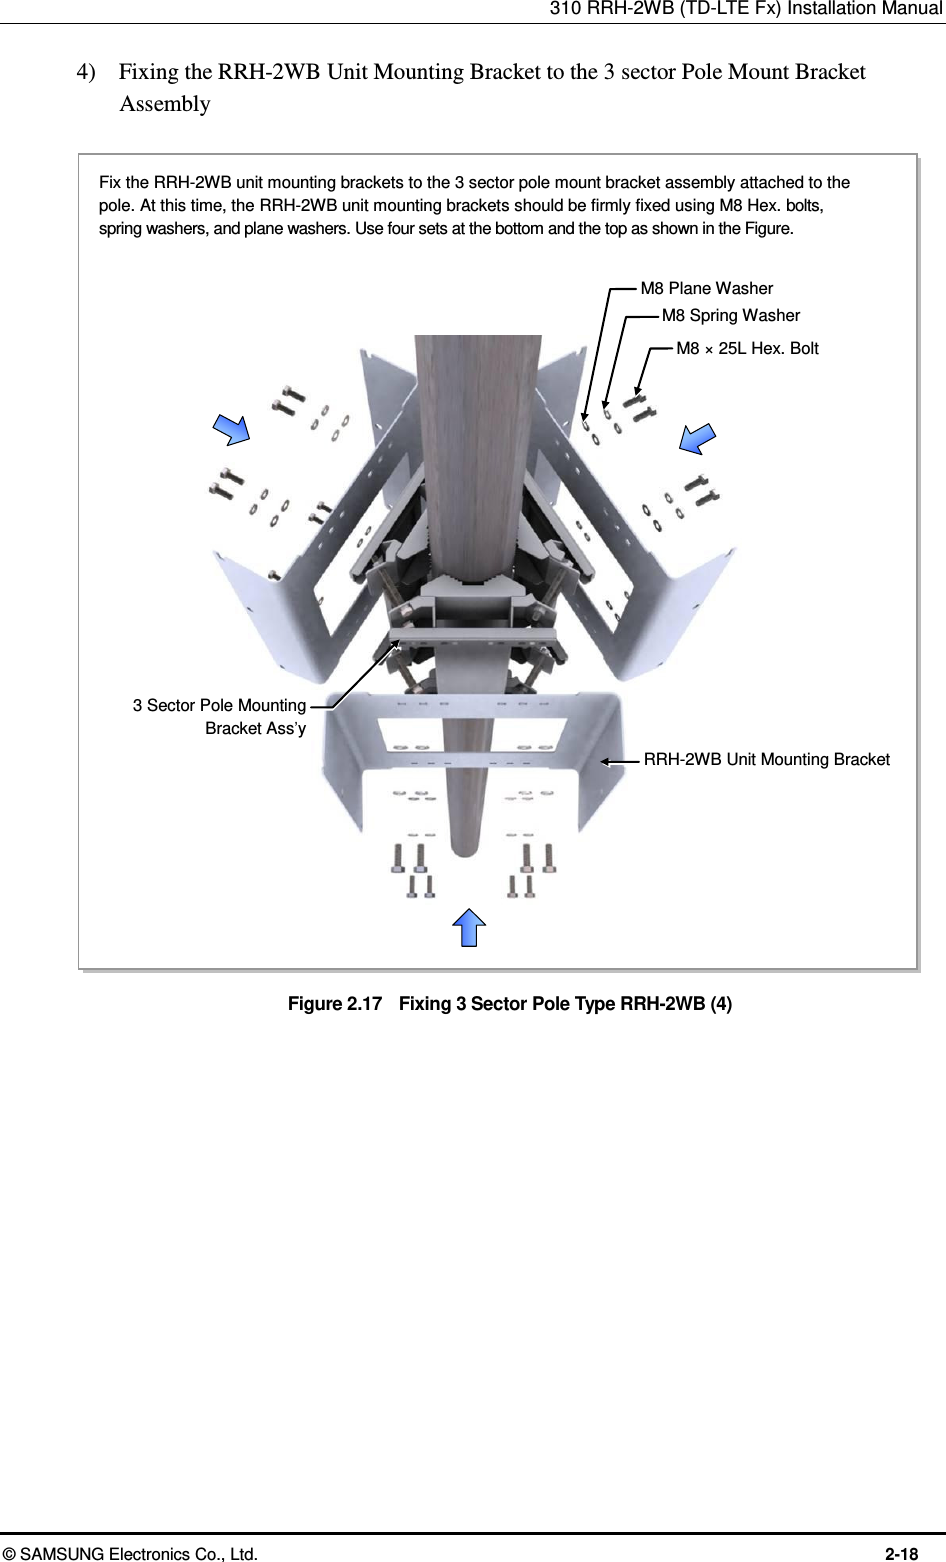 310 RRH-2WB (TD-LTE Fx) Installation Manual  © SAMSUNG Electronics Co., Ltd.  2-18 4)    Fixing the RRH-2WB Unit Mounting Bracket to the 3 sector Pole Mount Bracket Assembly  Figure 2.17    Fixing 3 Sector Pole Type RRH-2WB (4)  RRH-2WB Unit Mounting Bracket M8 × 25L Hex. Bolt M8 Spring Washer M8 Plane Washer 3 Sector Pole Mounting Bracket Ass’y Fix the RRH-2WB unit mounting brackets to the 3 sector pole mount bracket assembly attached to the pole. At this time, the RRH-2WB unit mounting brackets should be firmly fixed using M8 Hex. bolts, spring washers, and plane washers. Use four sets at the bottom and the top as shown in the Figure. 